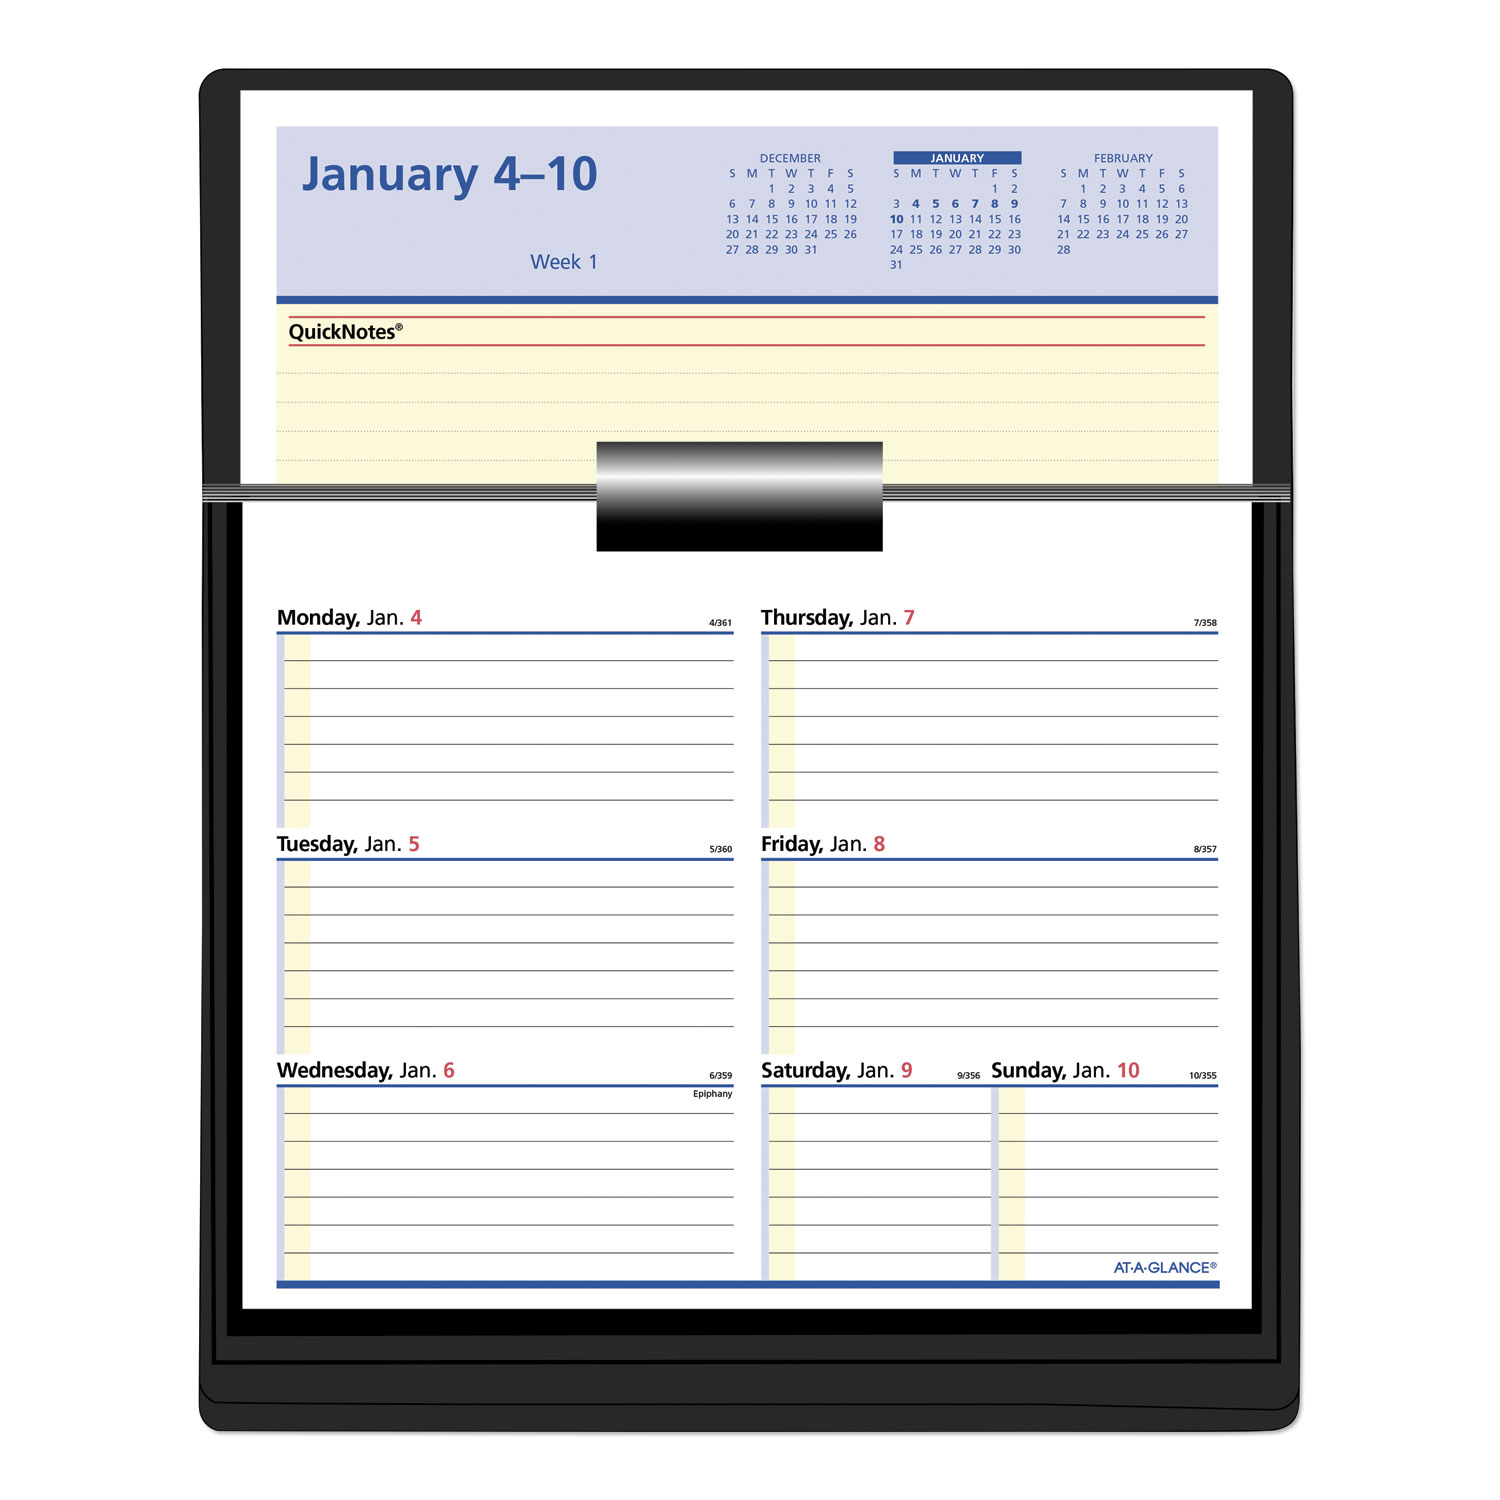  AT-A-GLANCE SW706-50 Flip-A-Week Desk Calendar Refill with QuickNotes, 5 5/8 x 7, White, 2020 (AAGSW70650) 